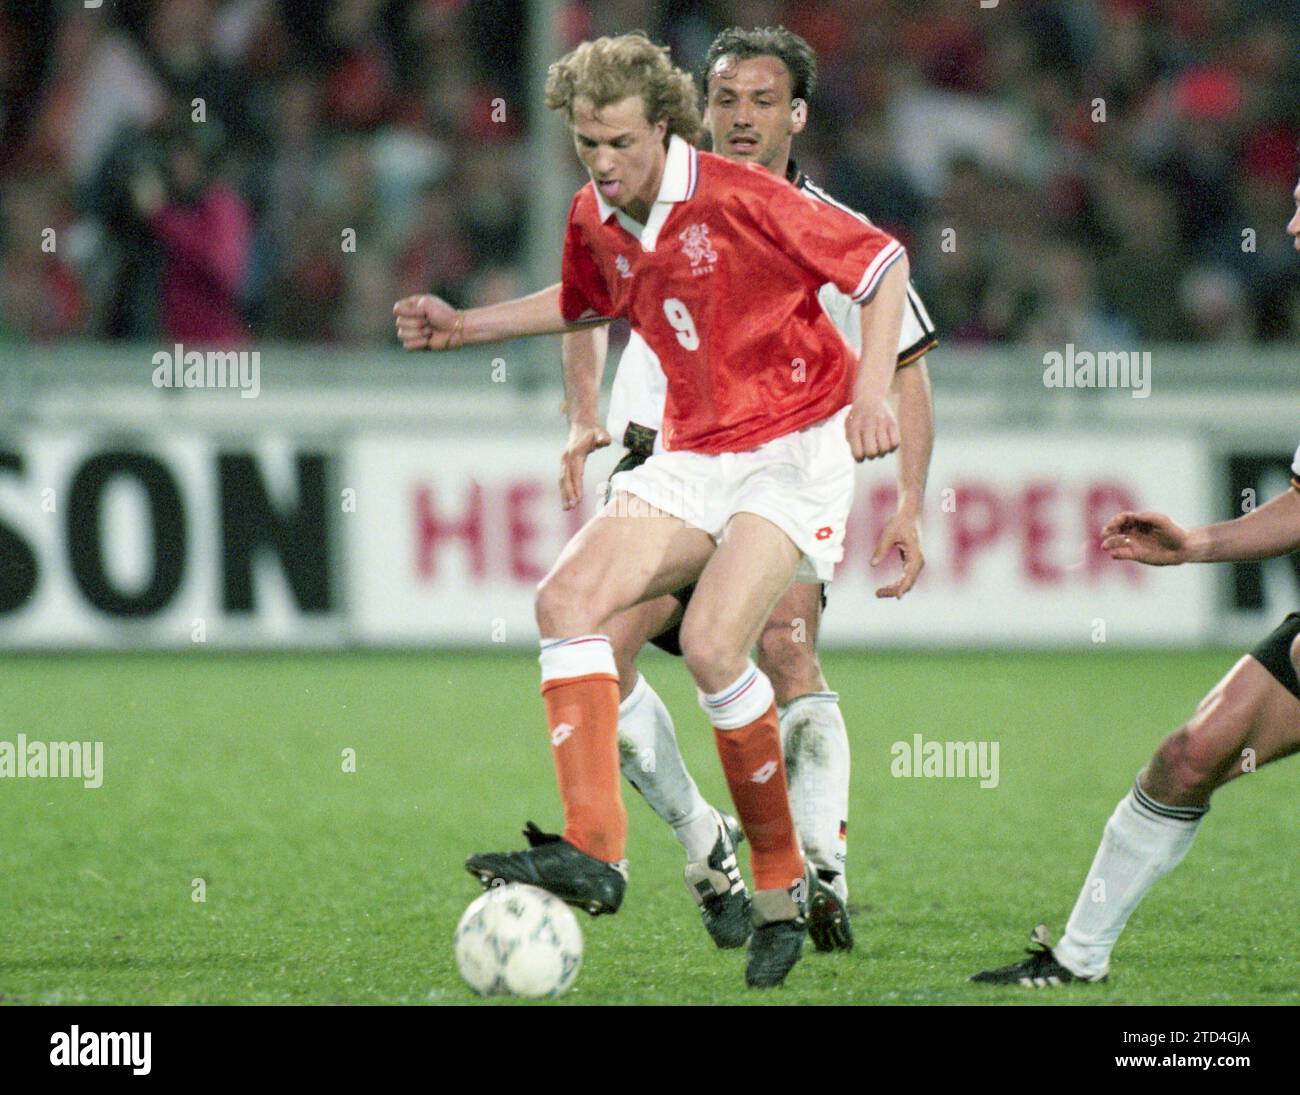 Football, firo: 04/24/1996 Football European Championship Euro European Championship preparation, friendly match, preparation for the international game 1996, archive photos, archive photo, archive Germany - Netherlands, Holland 0:1 Jordi Cruyff, individual action Stock Photo